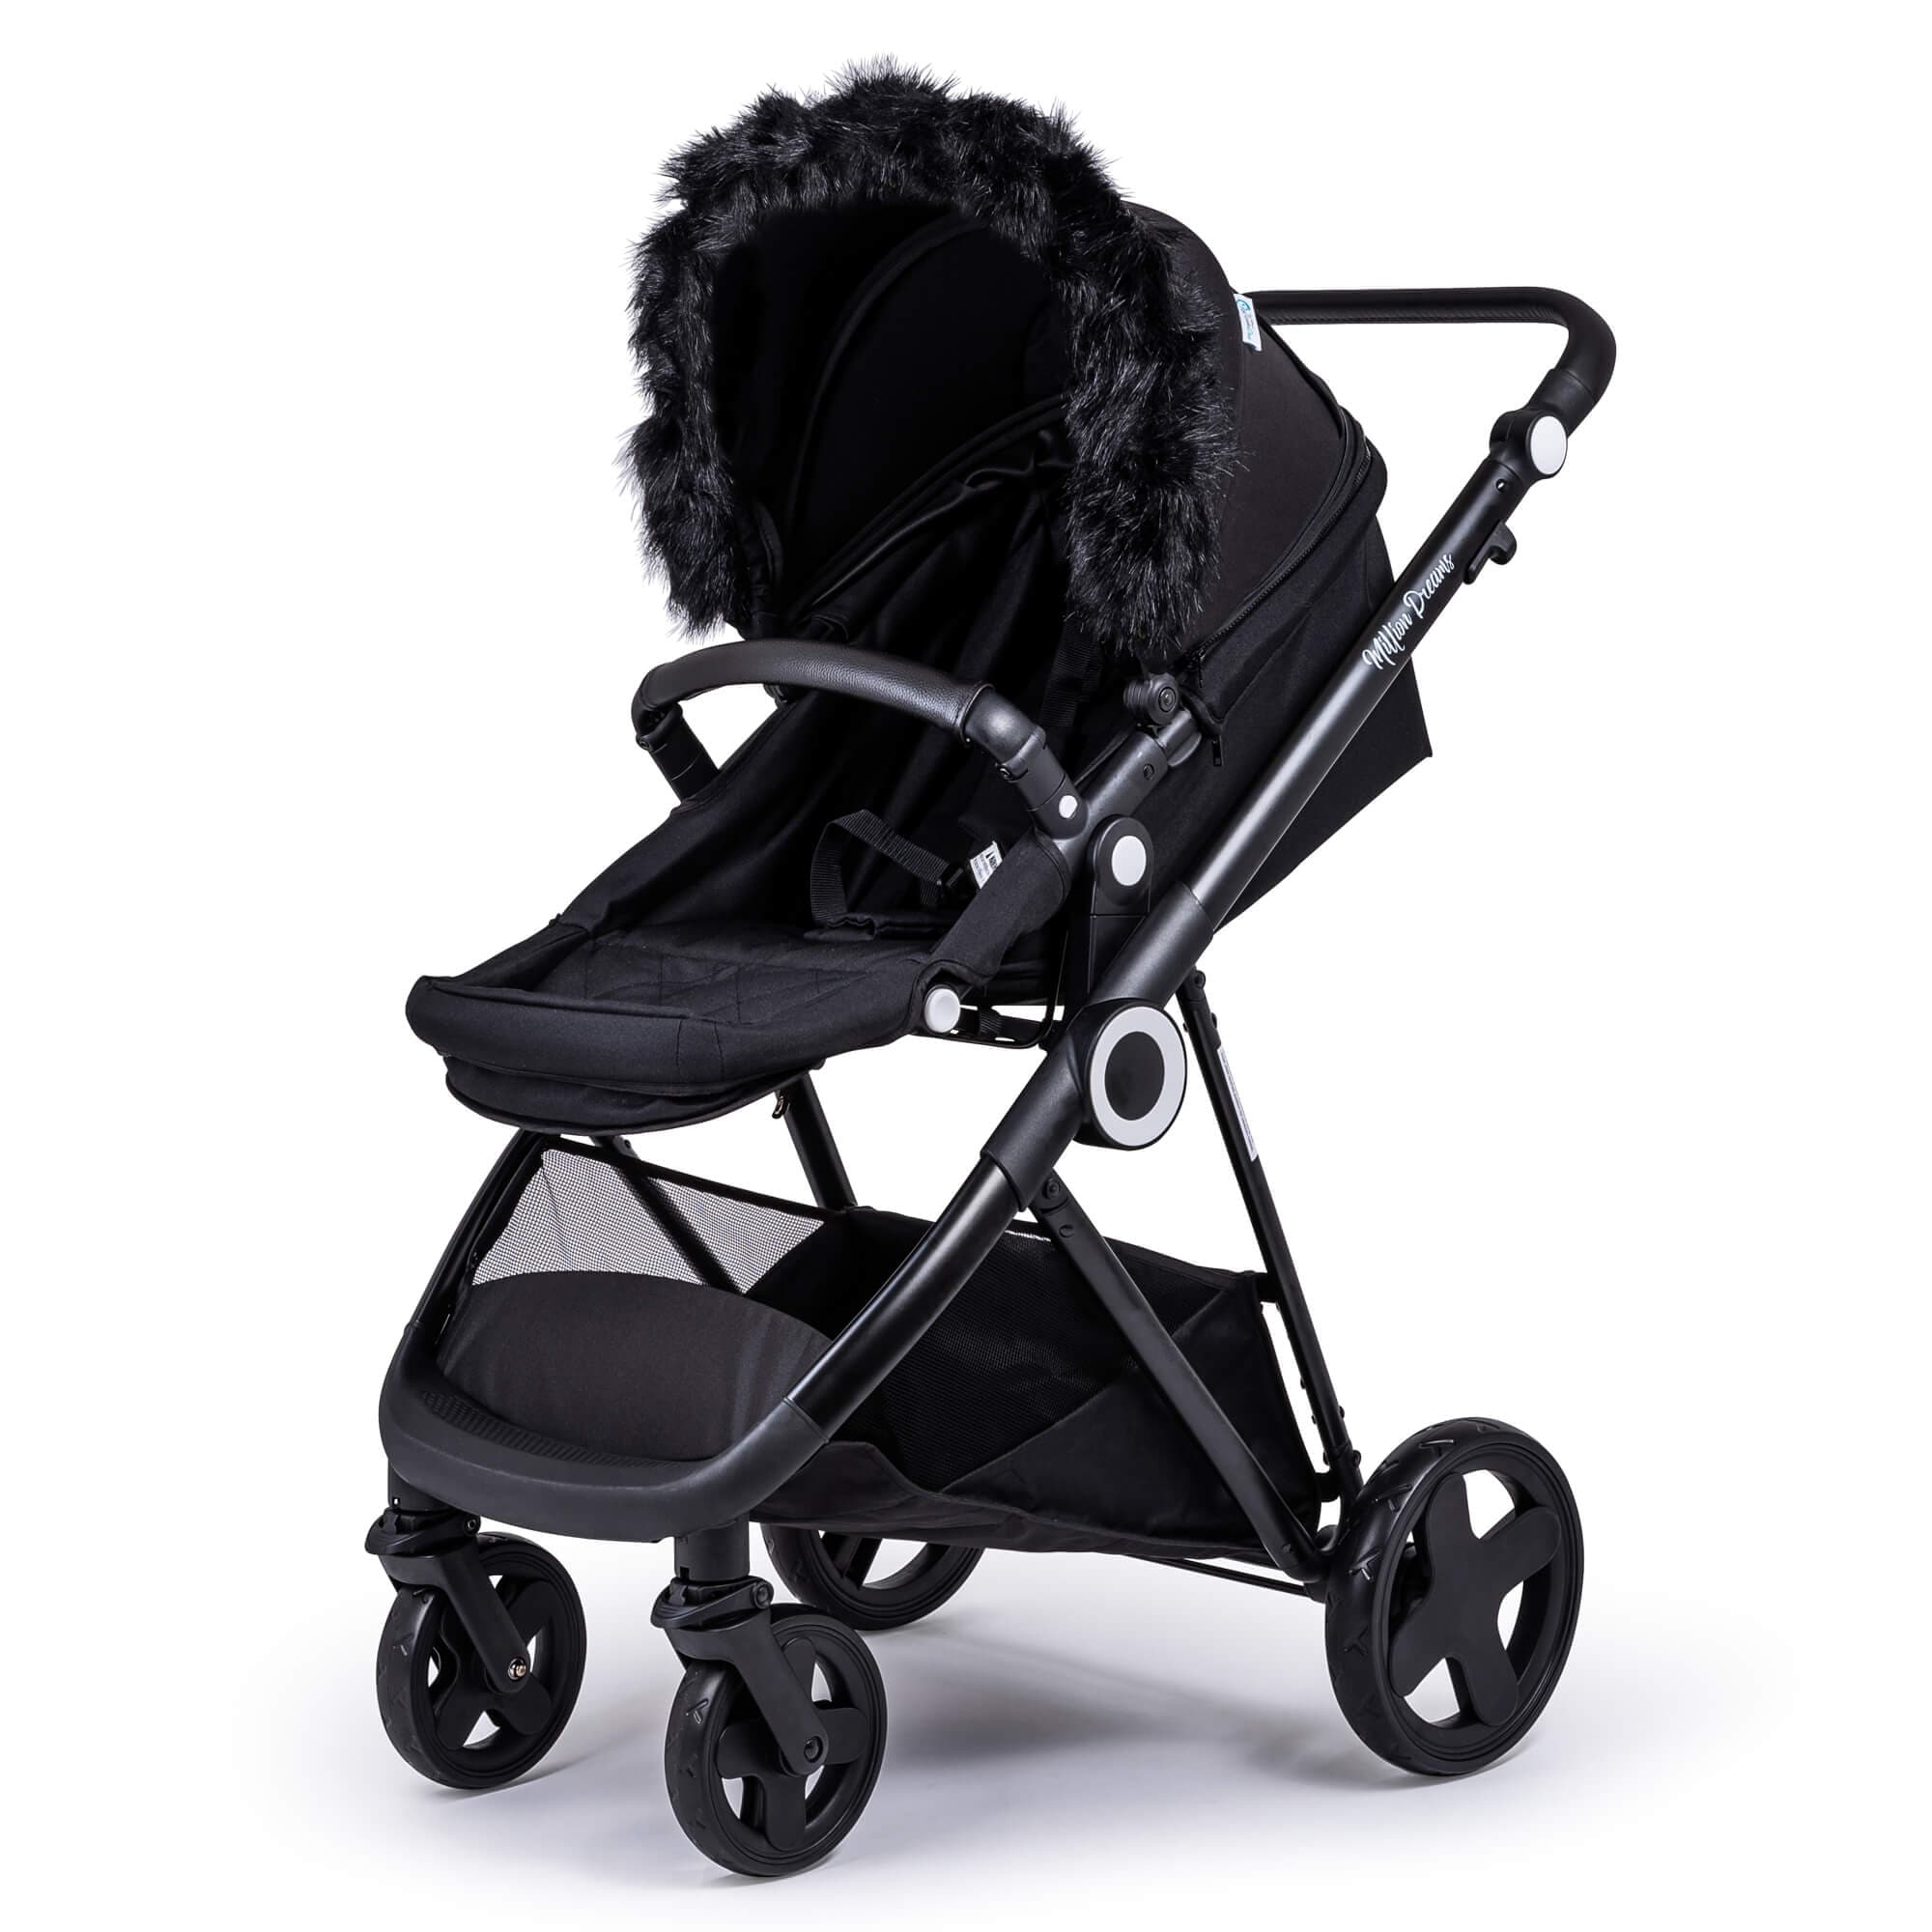 Pram Fur Hood Trim Attachment for Pushchair Compatible with Easywalker - For Your Little One